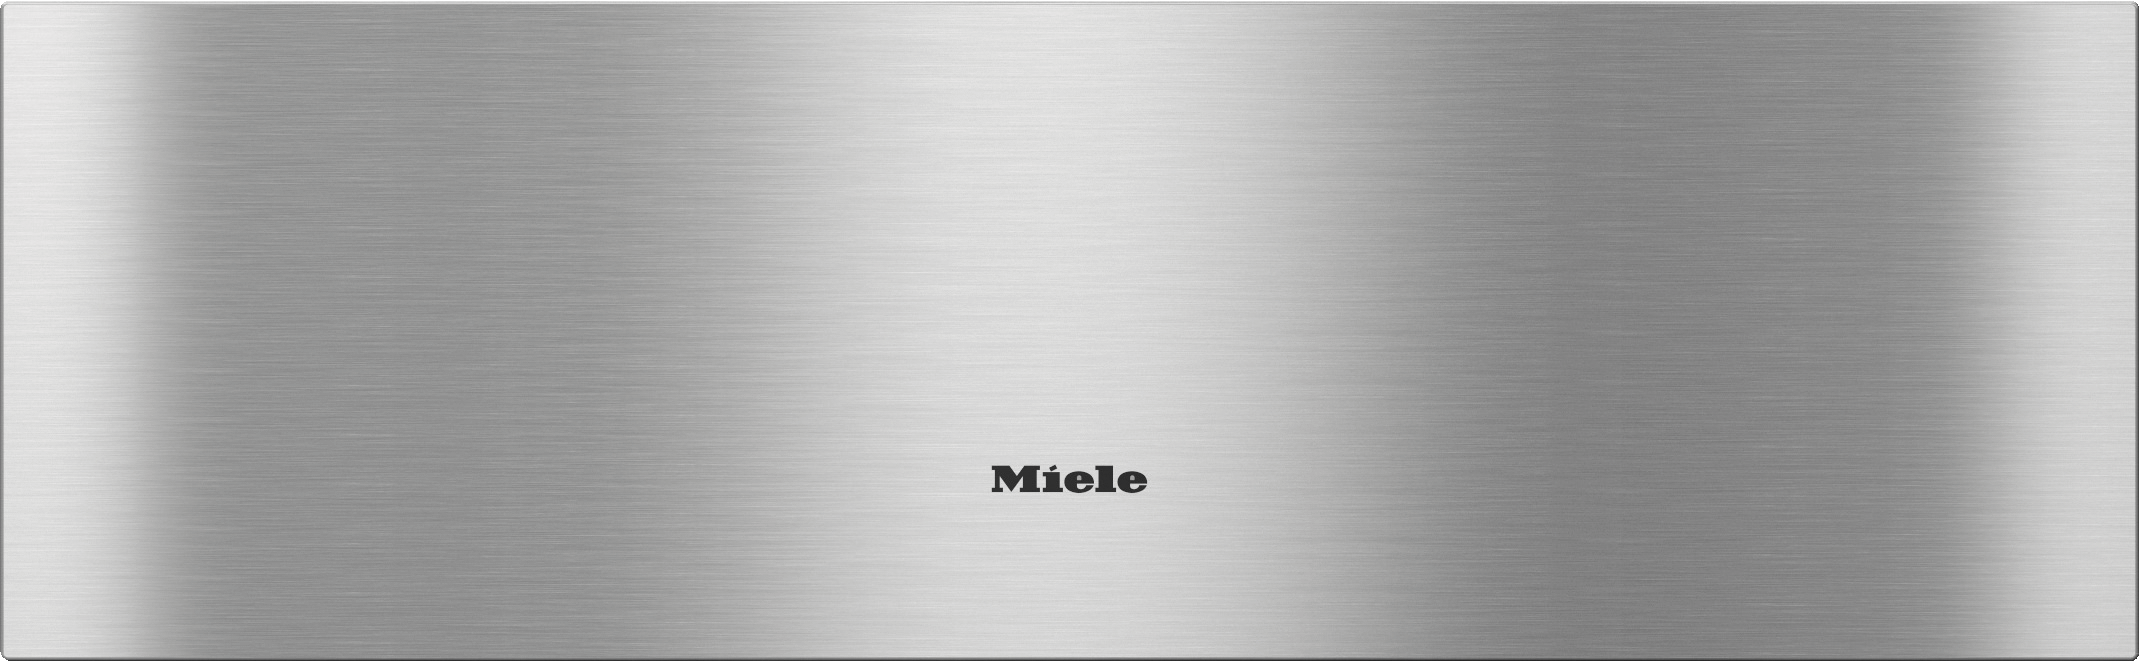 Miele ESW7570 STAINLESS STEEL   Handleless Gourmet Warming Drawer, 30